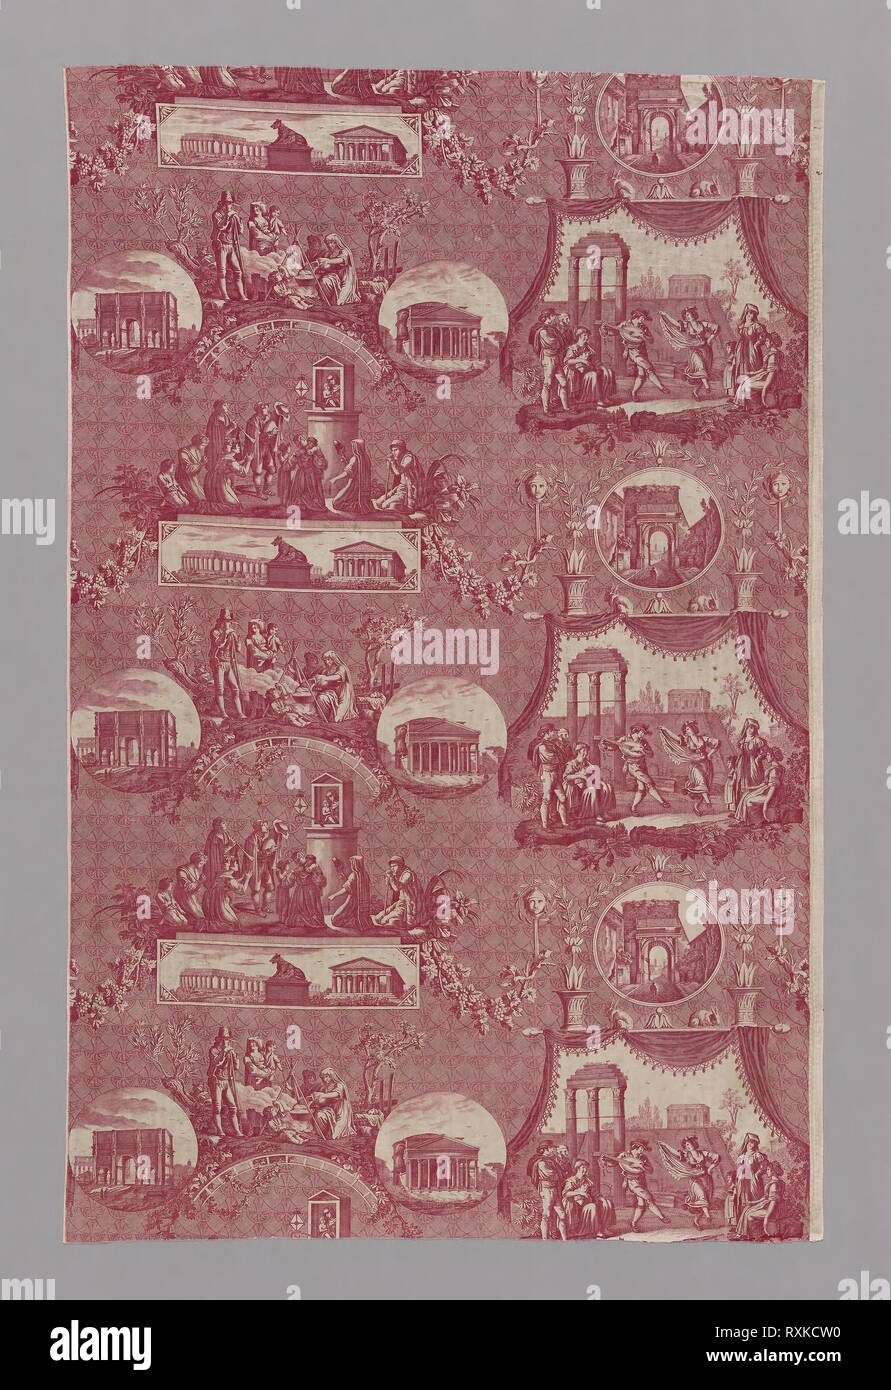 Le Romain (The Roman) (Furnishing Fabric). Designed by Jean Baptiste Huet (French, 1745-1811) after etchings by Bartolomeo Pinelli (Italian, 1781-1835) engraved by Jules Mallet (French, 1759-1835); Manufactured by Oberkampf et Widmer (French, 1738-1815); France, Jouy-en-Josas. Date: 1821. Dimensions: 149.8 × 96.9 cm (59 × 38 1/8 in.)  Repeat: 52.4 × 92.7 cm (20 5/8 × 36 1/2 in.). Cotton, plain weave; engraved roller printed. Origin: France. Museum: The Chicago Art Institute. Stock Photo